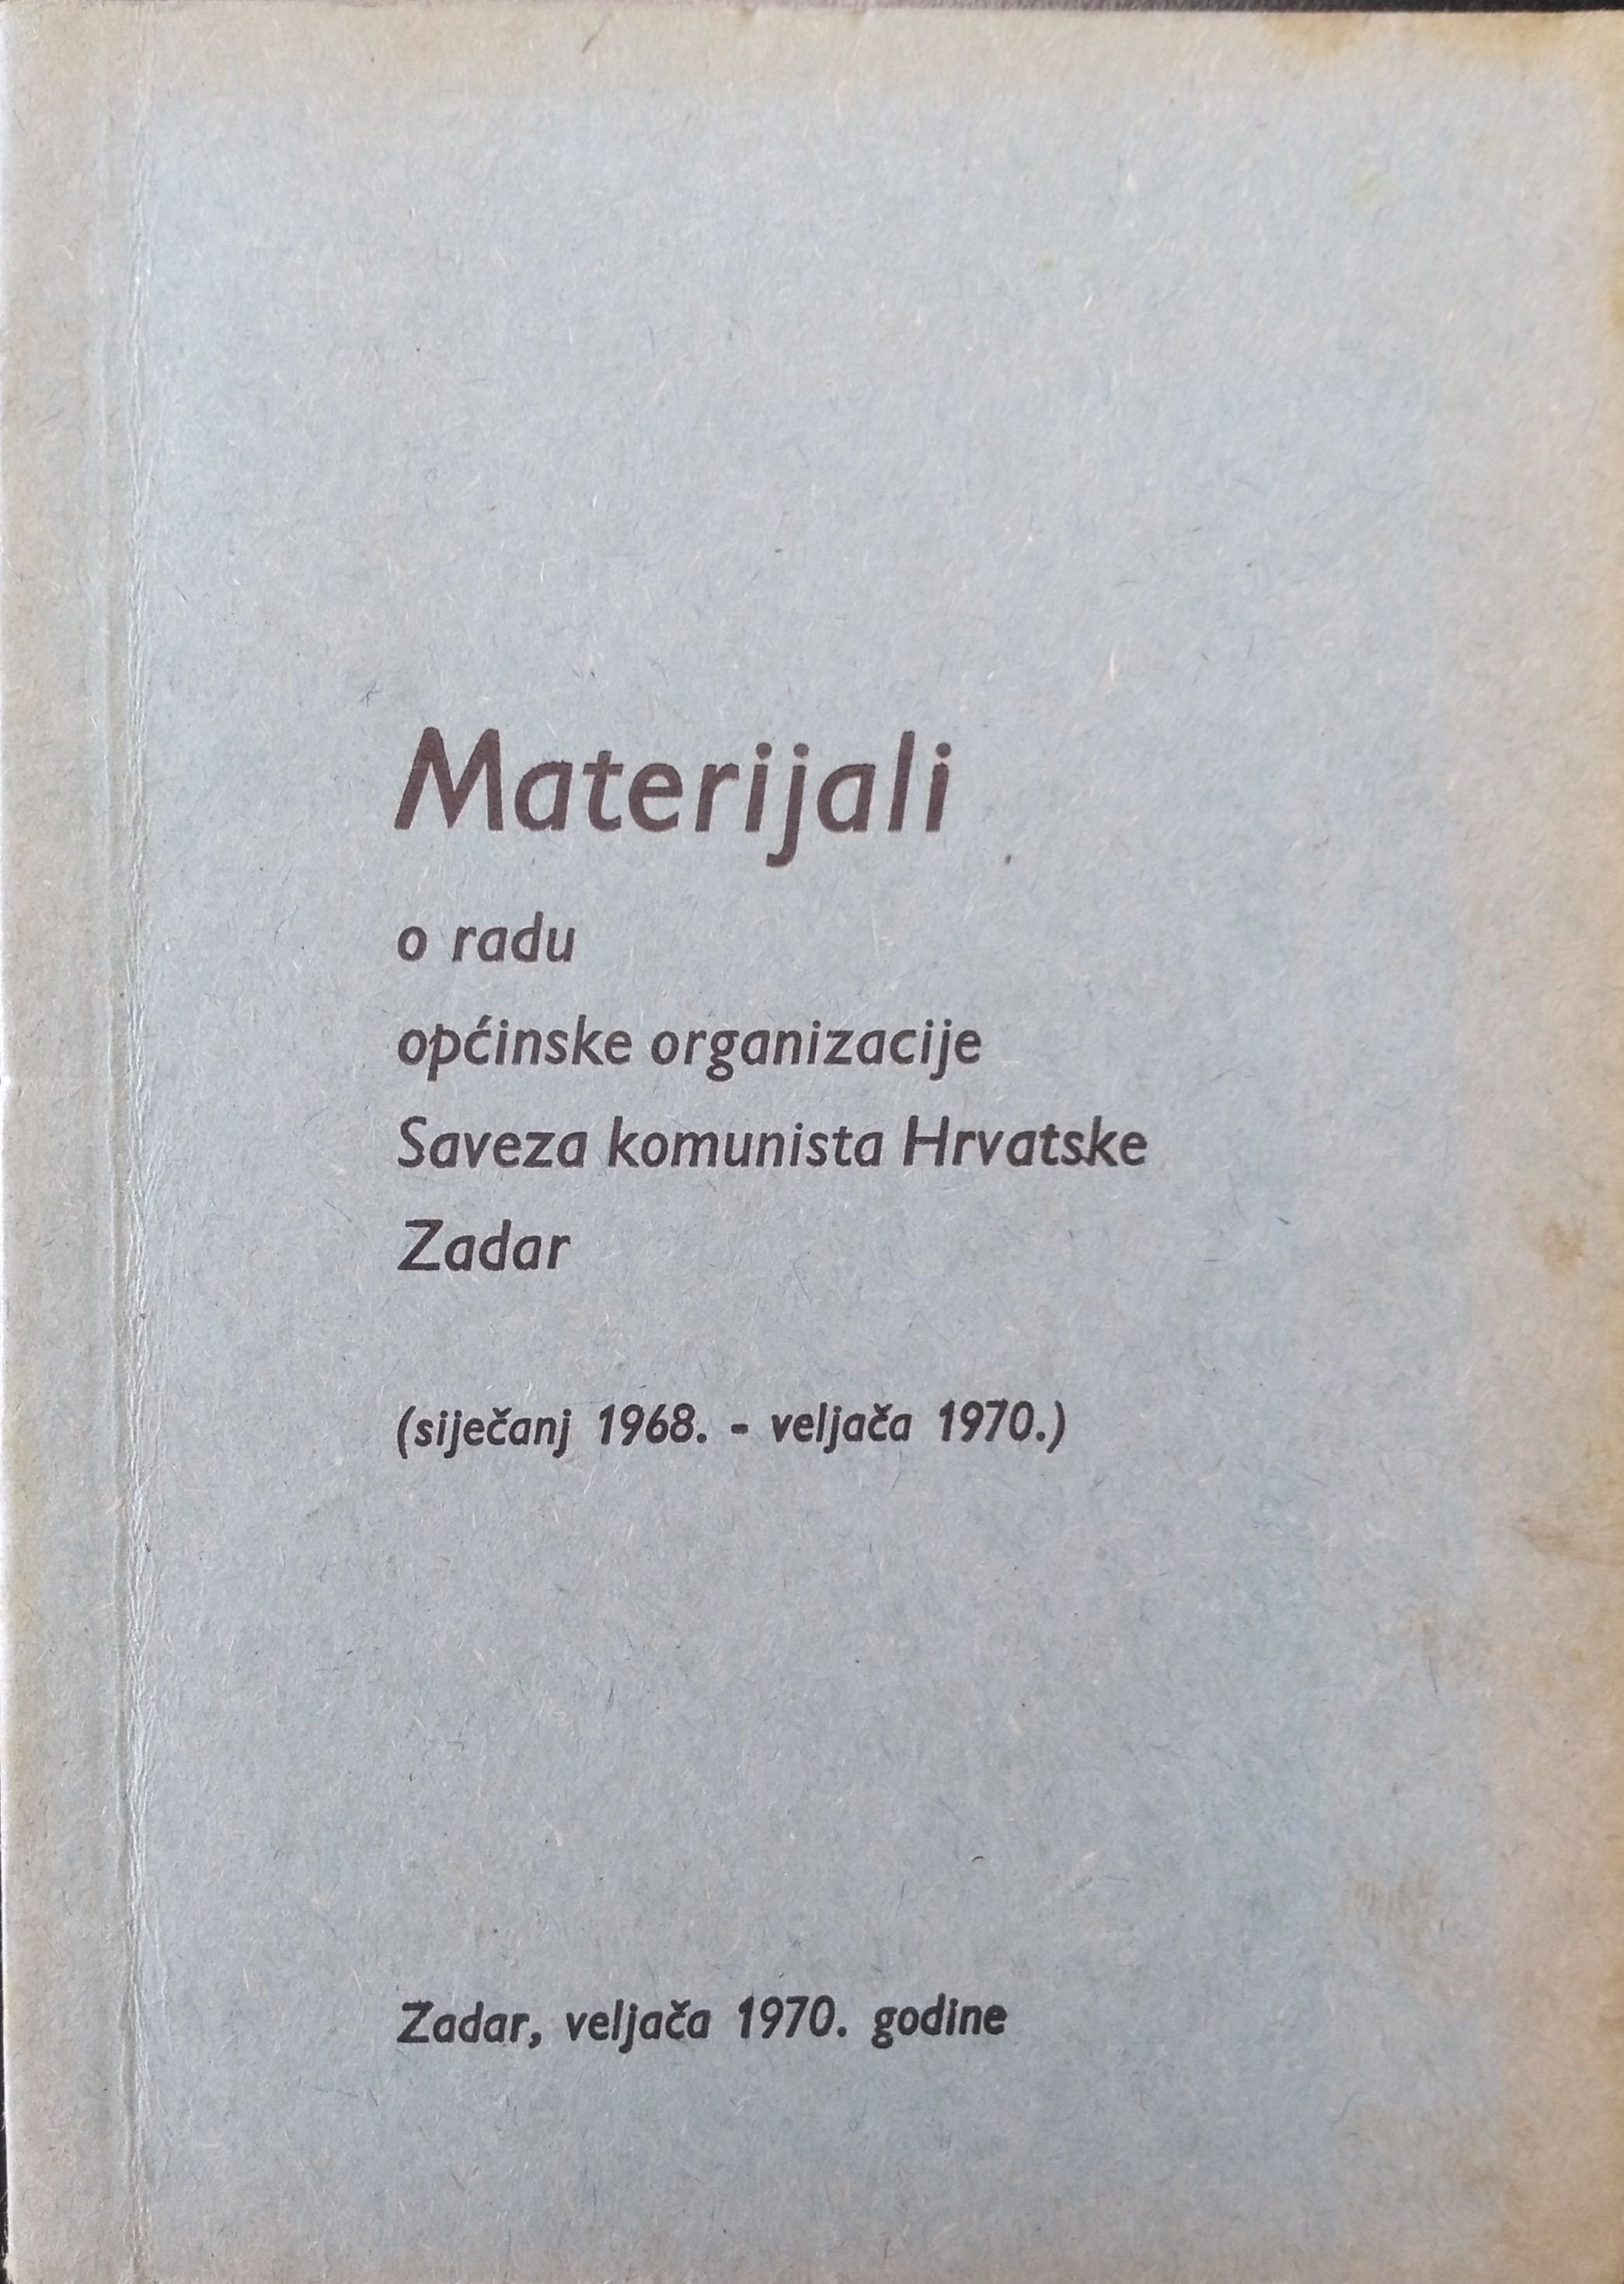 Cover of a publication published by the Municipal Committee of the League of Communists of Croatia in Zadar.